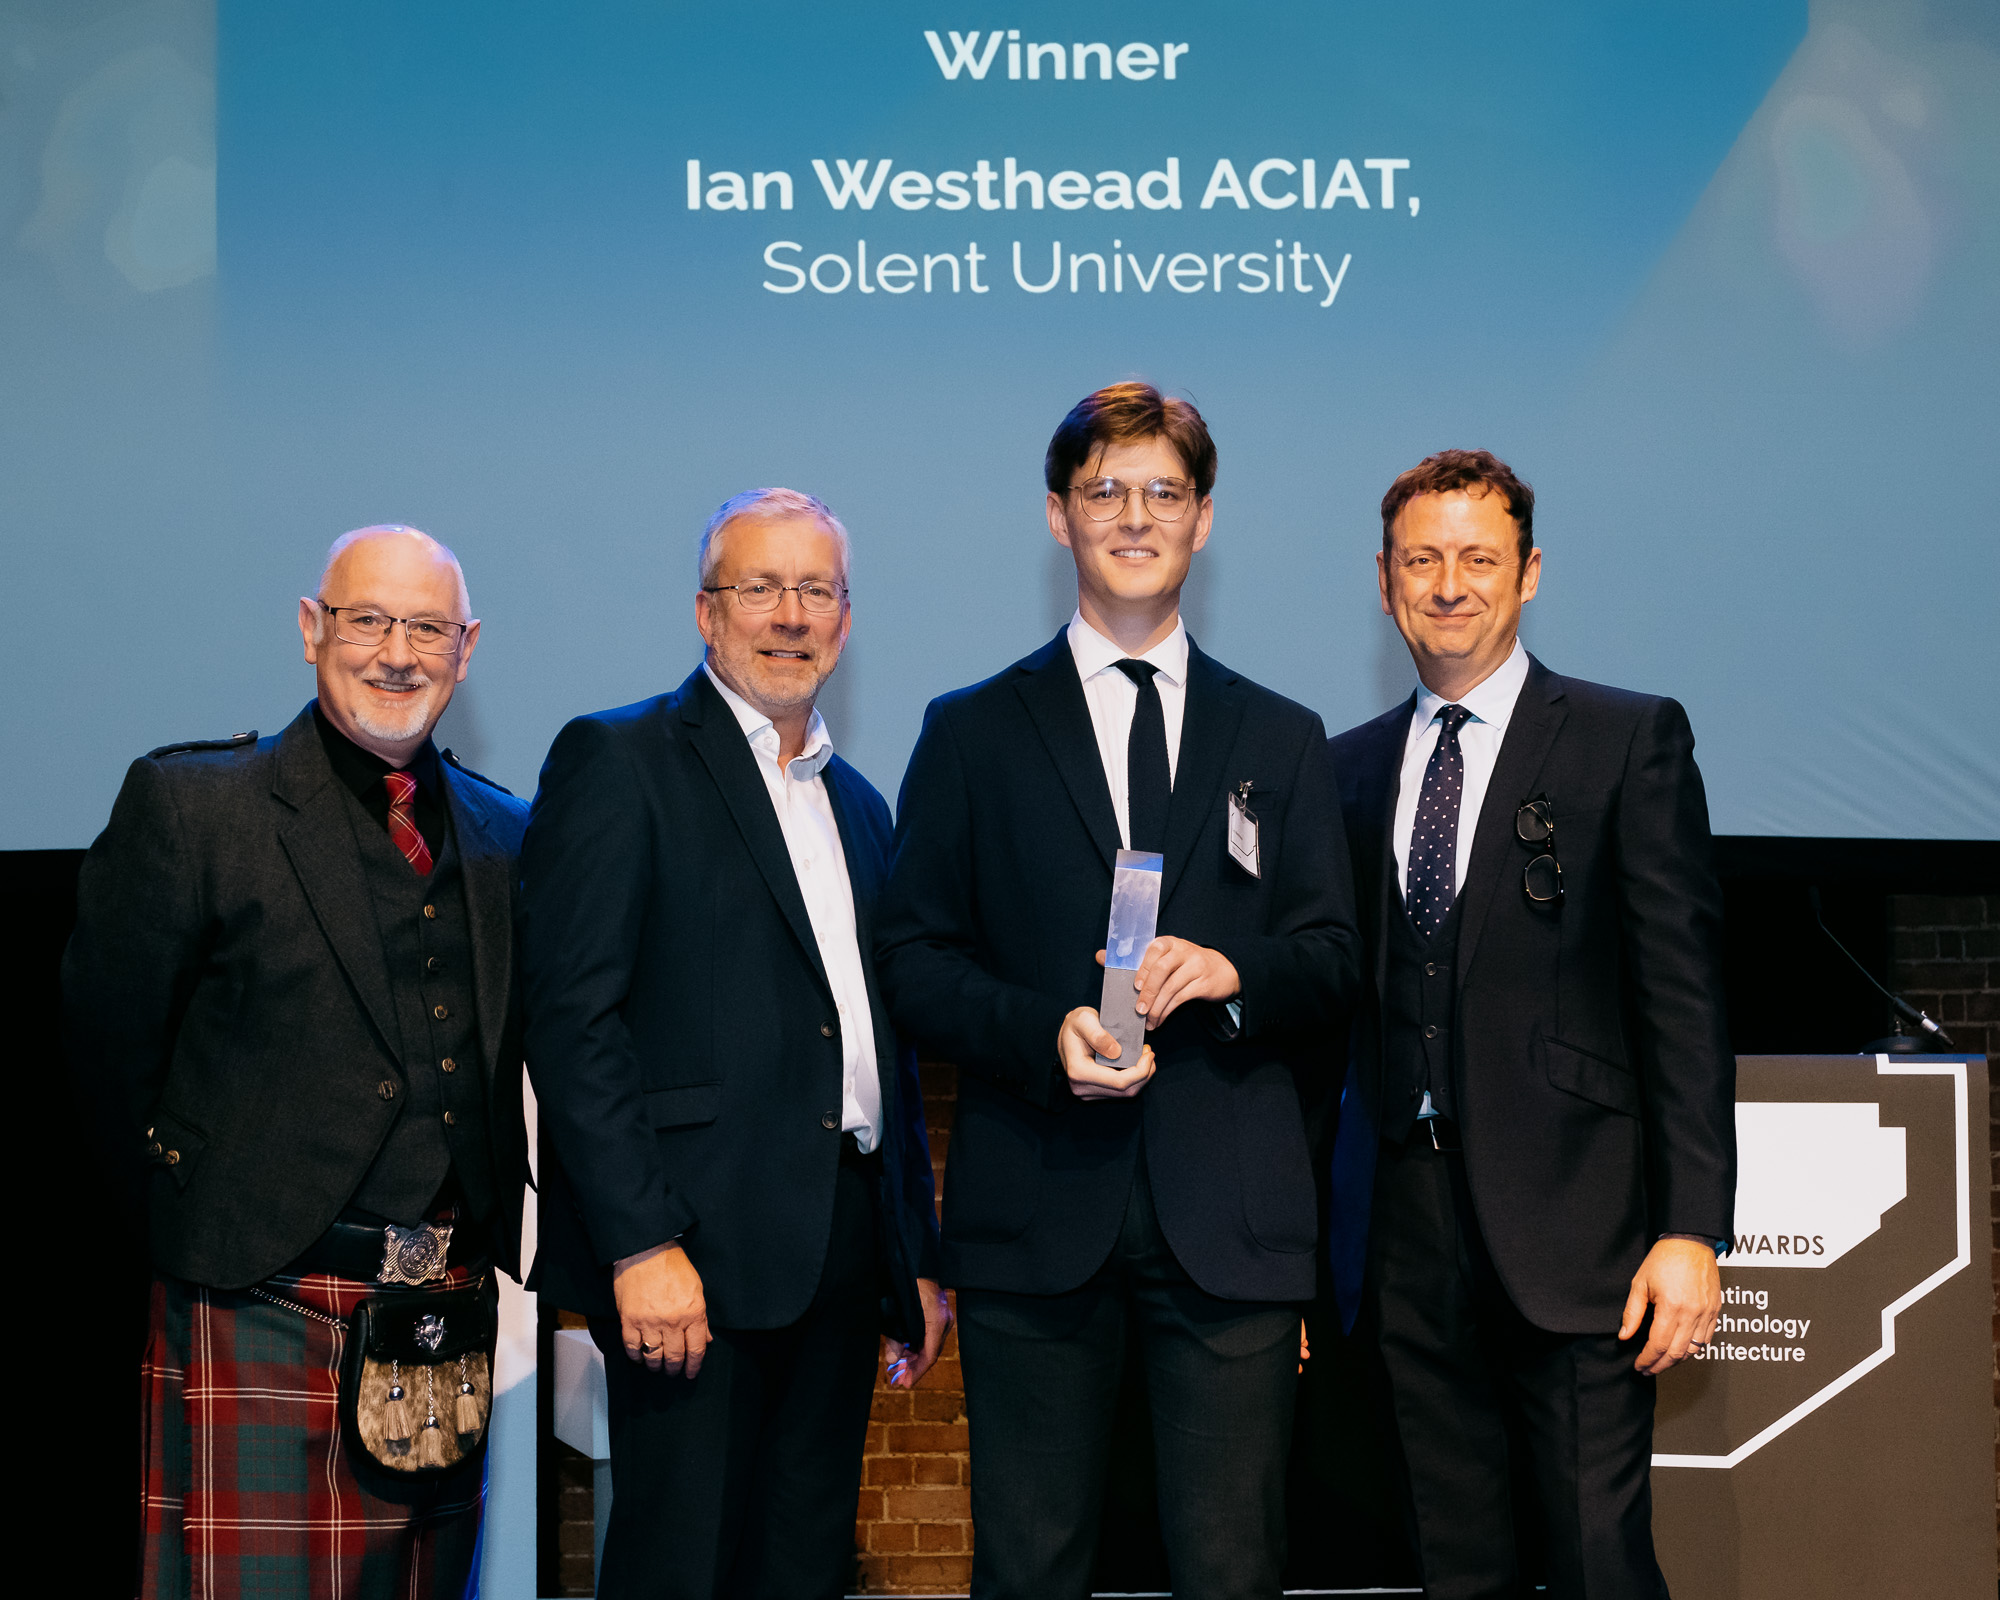 Ian Westhead pictures with his award along with CIAT President, Kevin Crawford, and host Matt Allwright